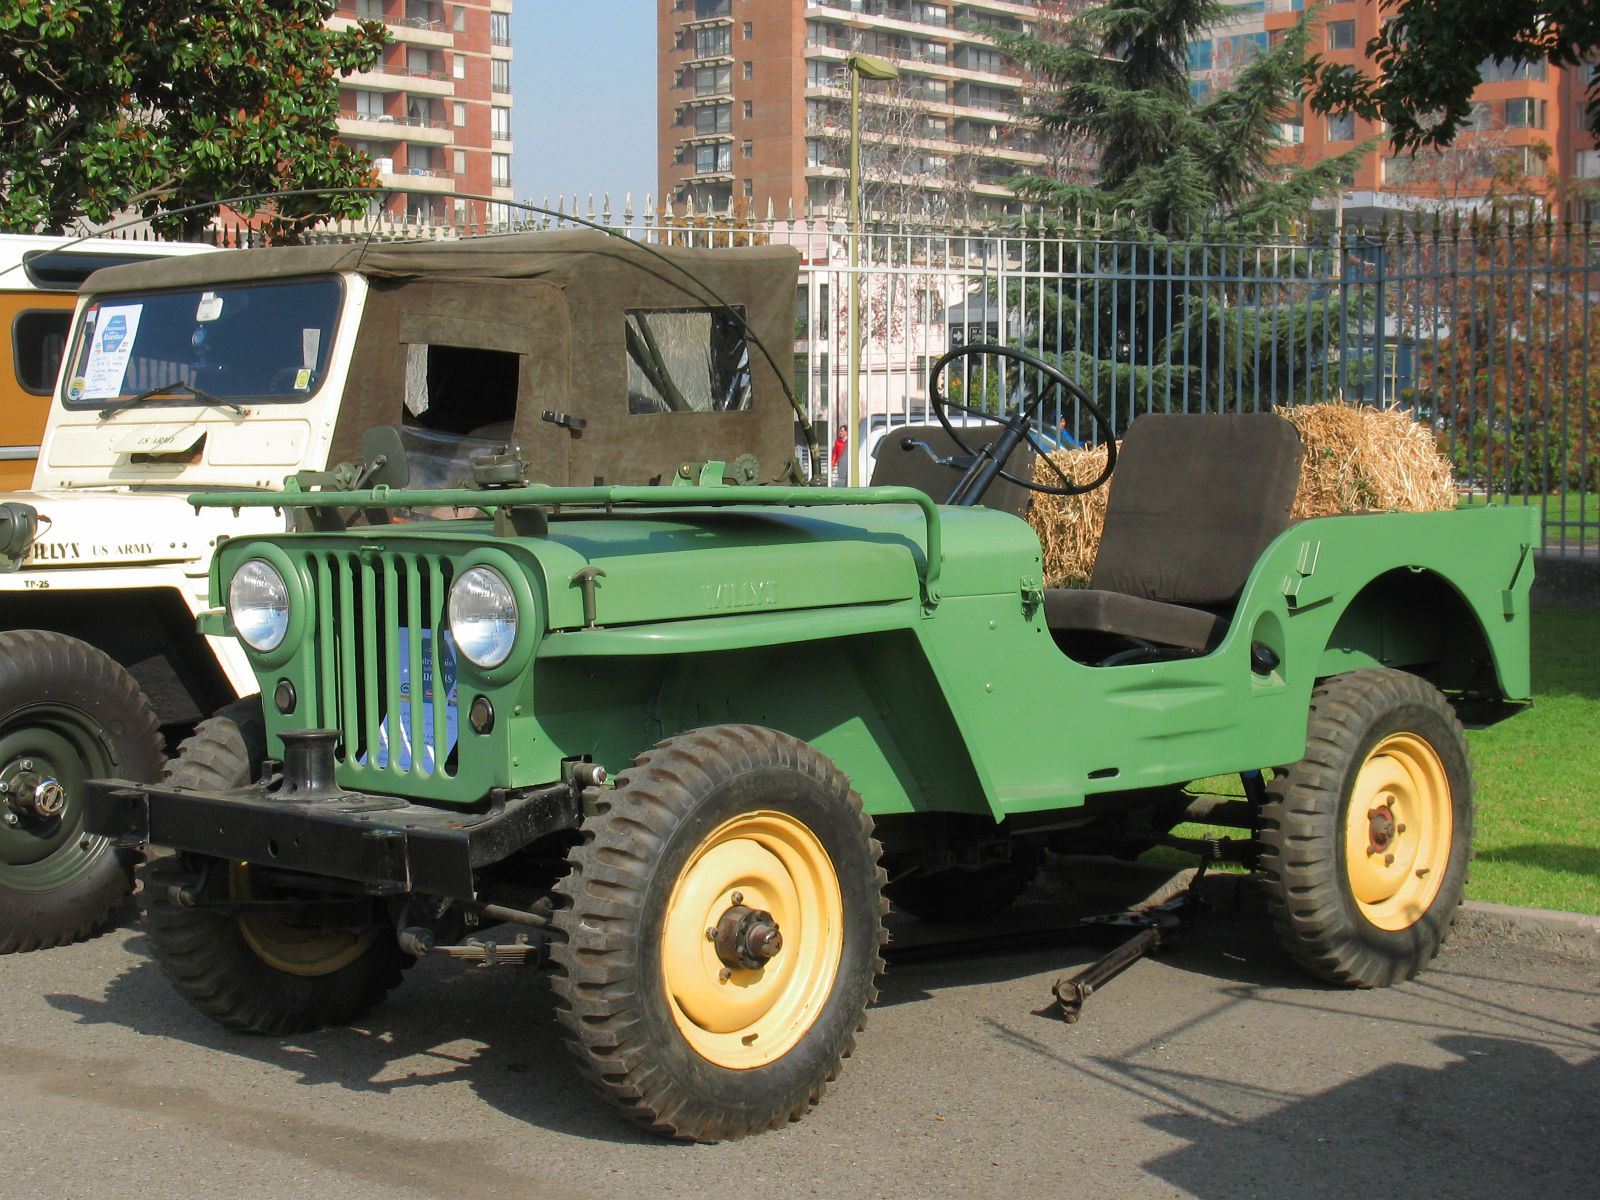 The Willys CJ-2A. 7 slots and a trapezoid grille shape that would survive until Daimler.